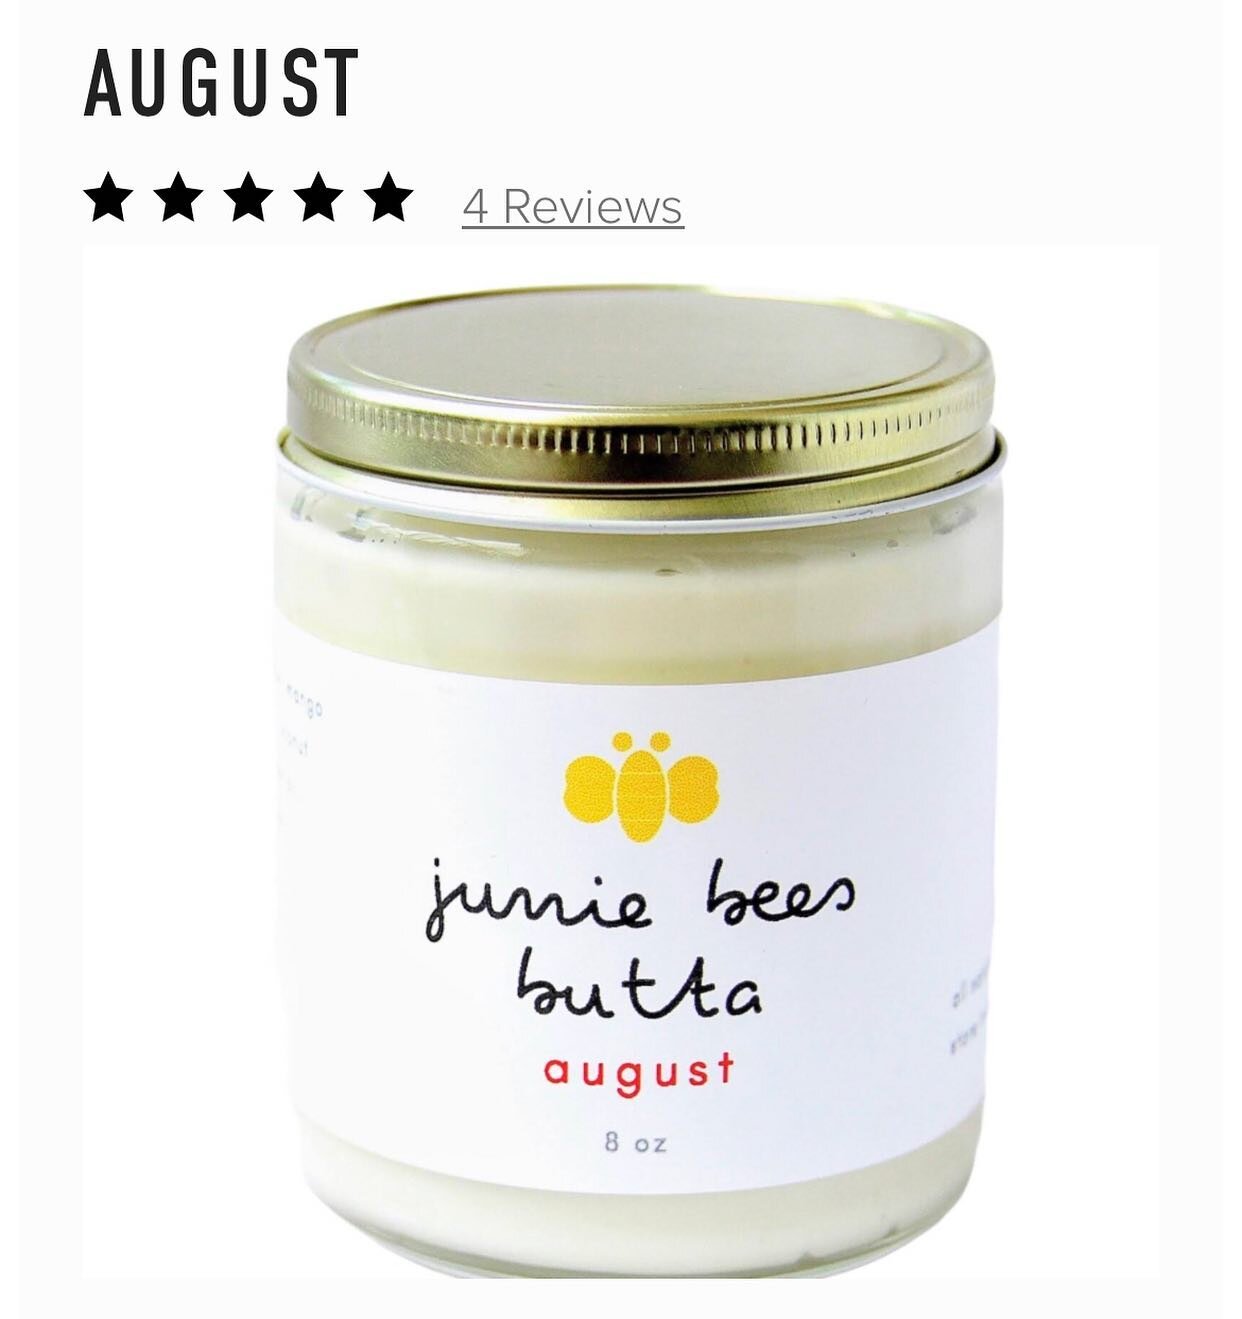 We're excited to announce the return of our beloved August Butta, a sensational 5-star fragrance just in time for Summer! If you haven't encountered this scent before, get ready for a delightful Summer experience. From the moment you open the jar to 